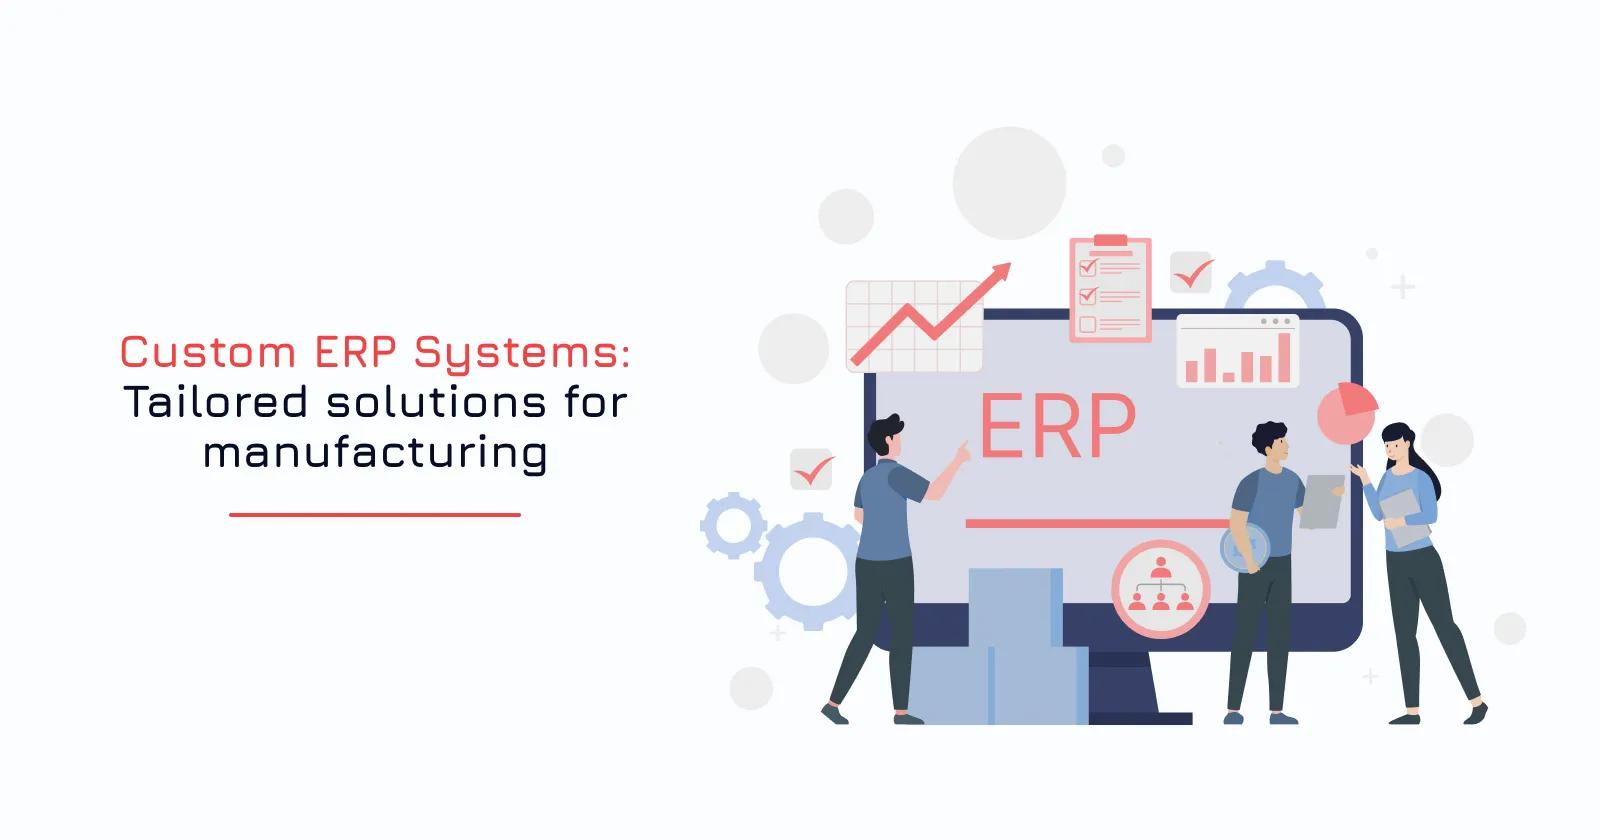 Custom ERP Systems: Tailored solutions for manufacturing